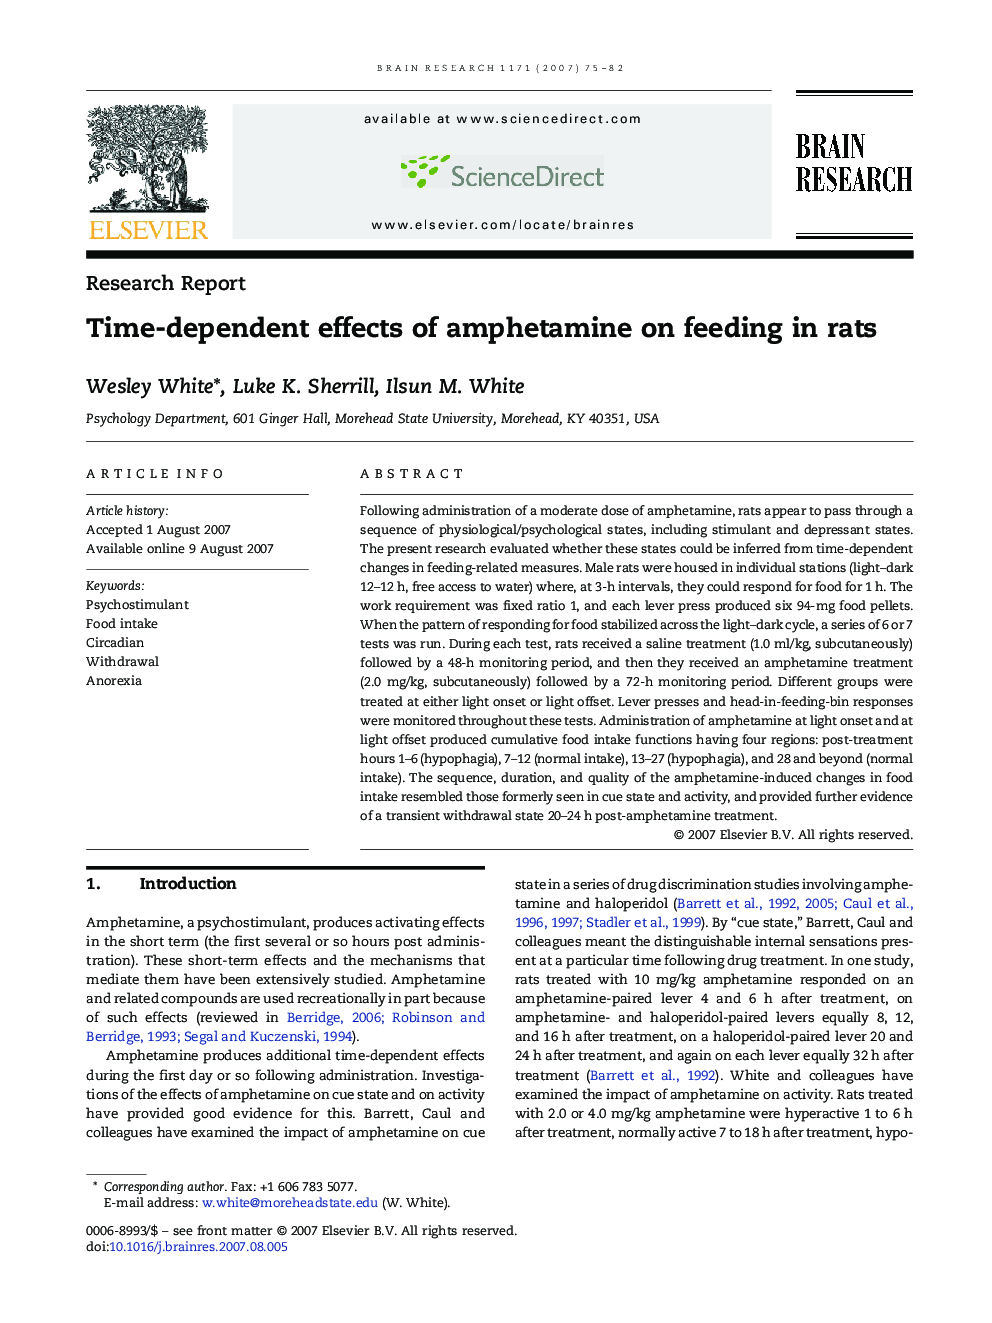 Time-dependent effects of amphetamine on feeding in rats